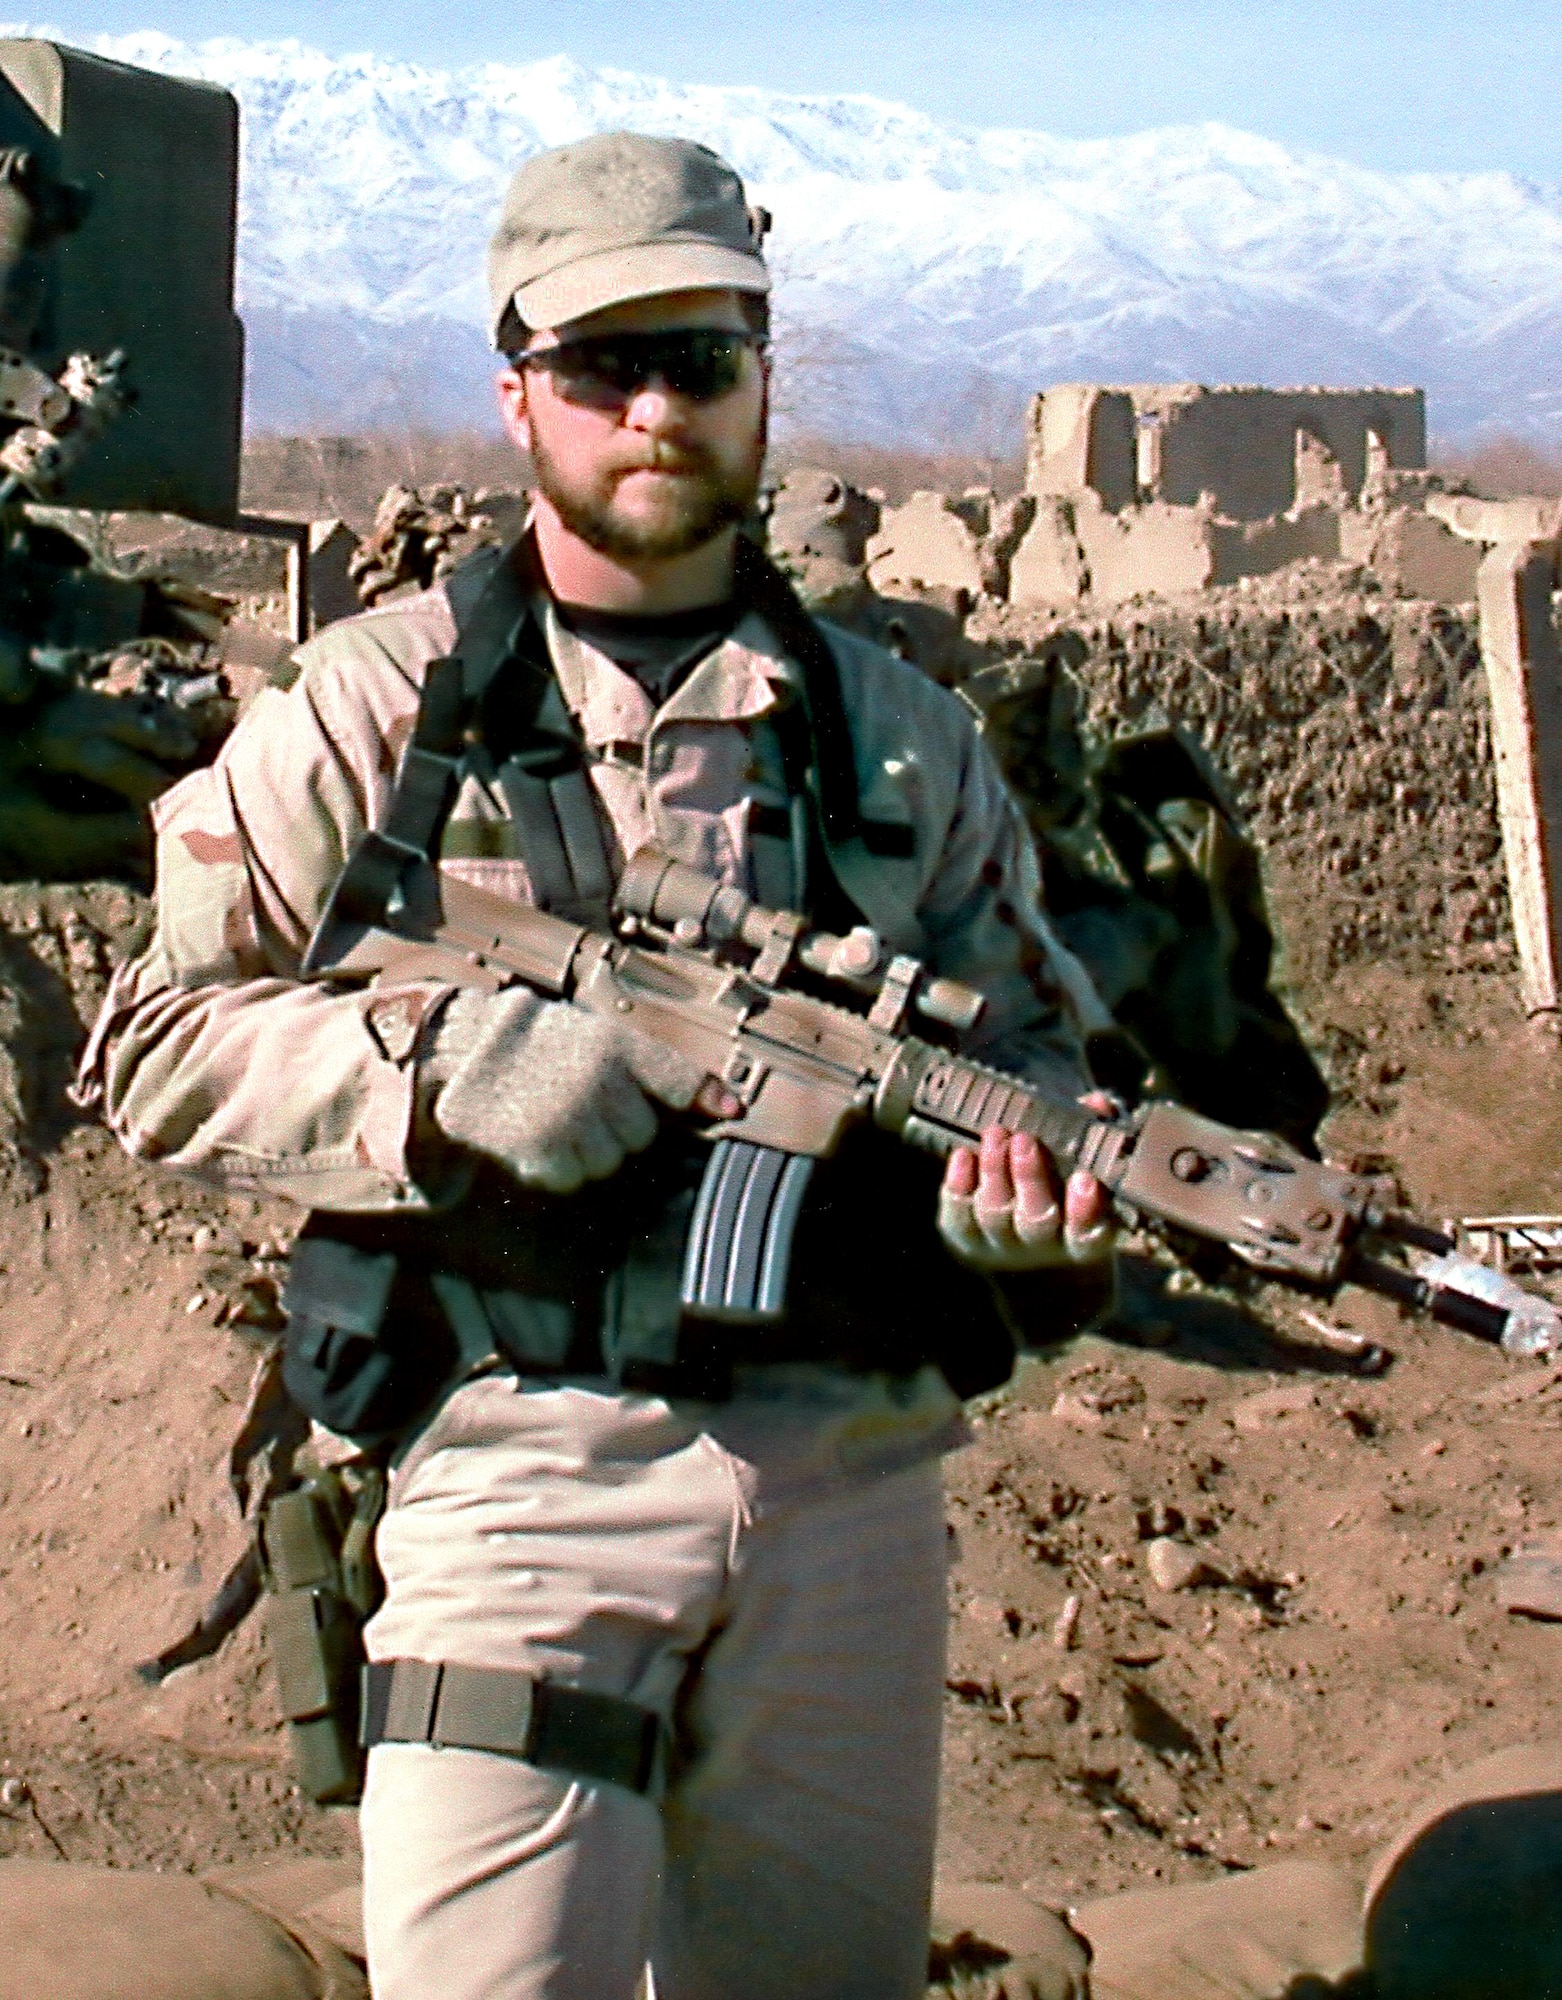 Air Force Tech. Sgt. John A. Chapman, a combat controller, was killed during a fierce battle against al-Qaida fighters in Takur Ghar, Afghanistan, March 4, 2002. He will be posthumously awarded the Medal of Honor for “conspicuous gallantry and intrepidity at the risk of life above and beyond the call of duty.”